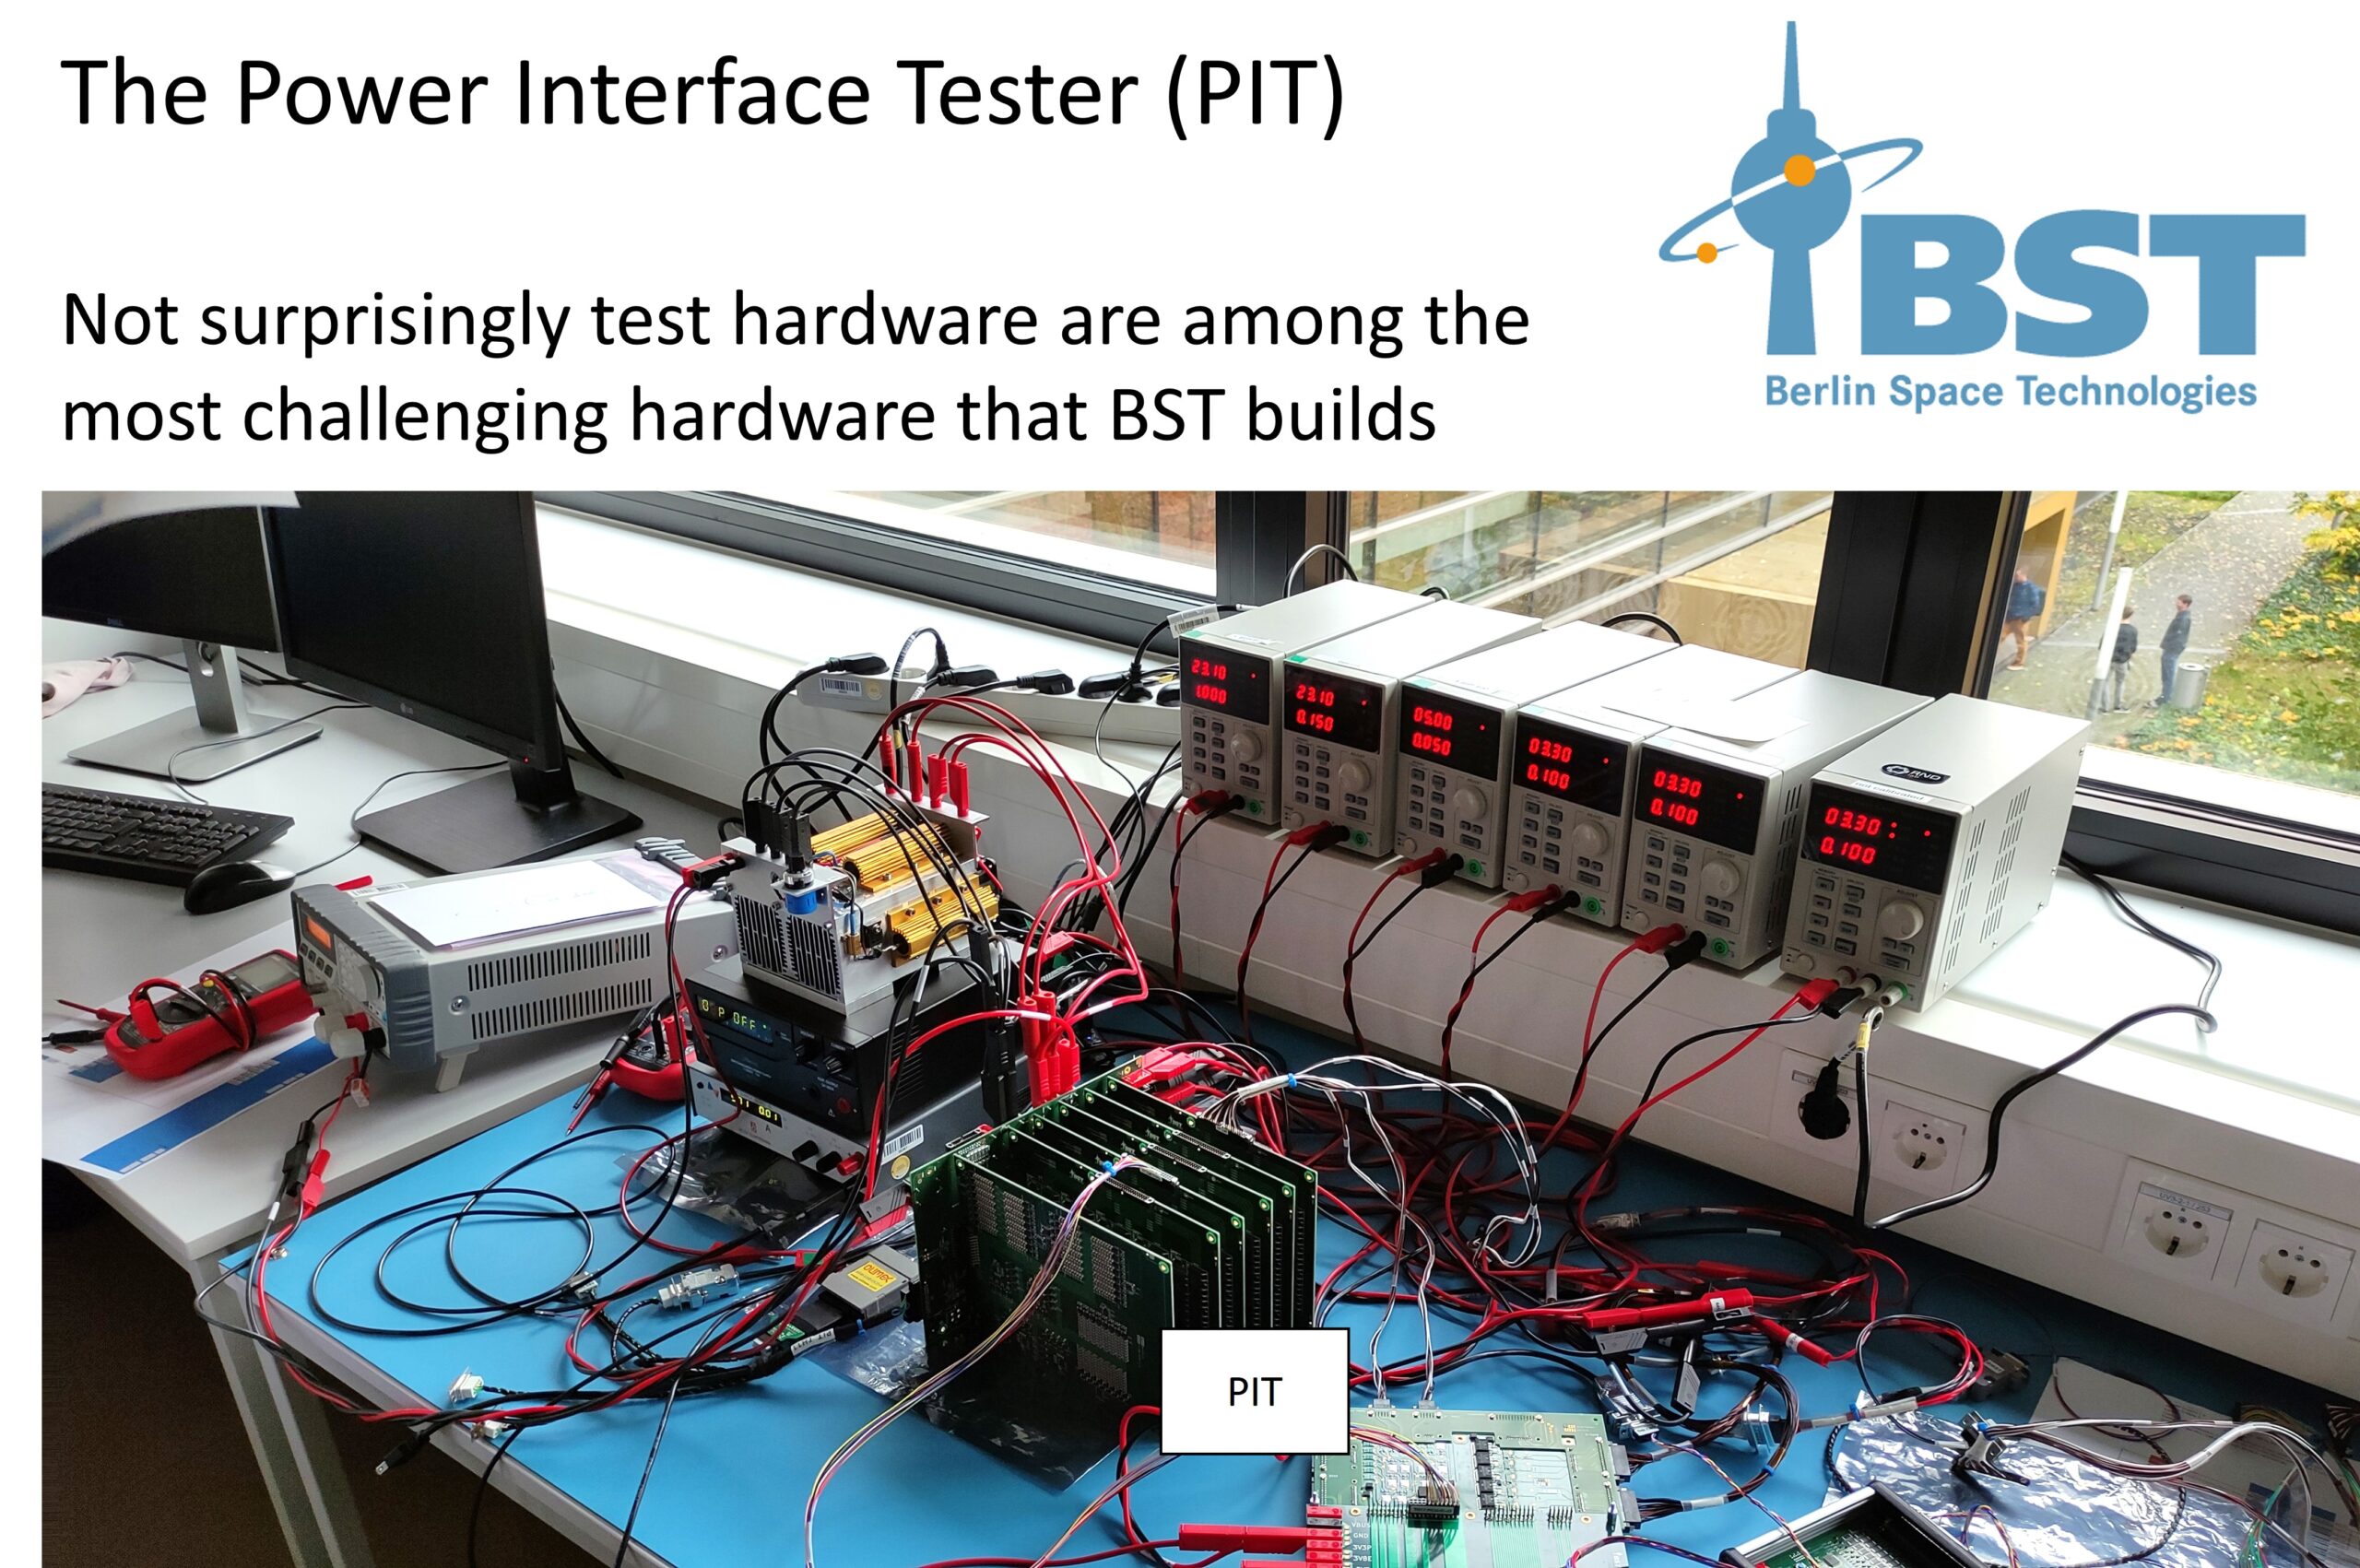 The Power Interface Tester